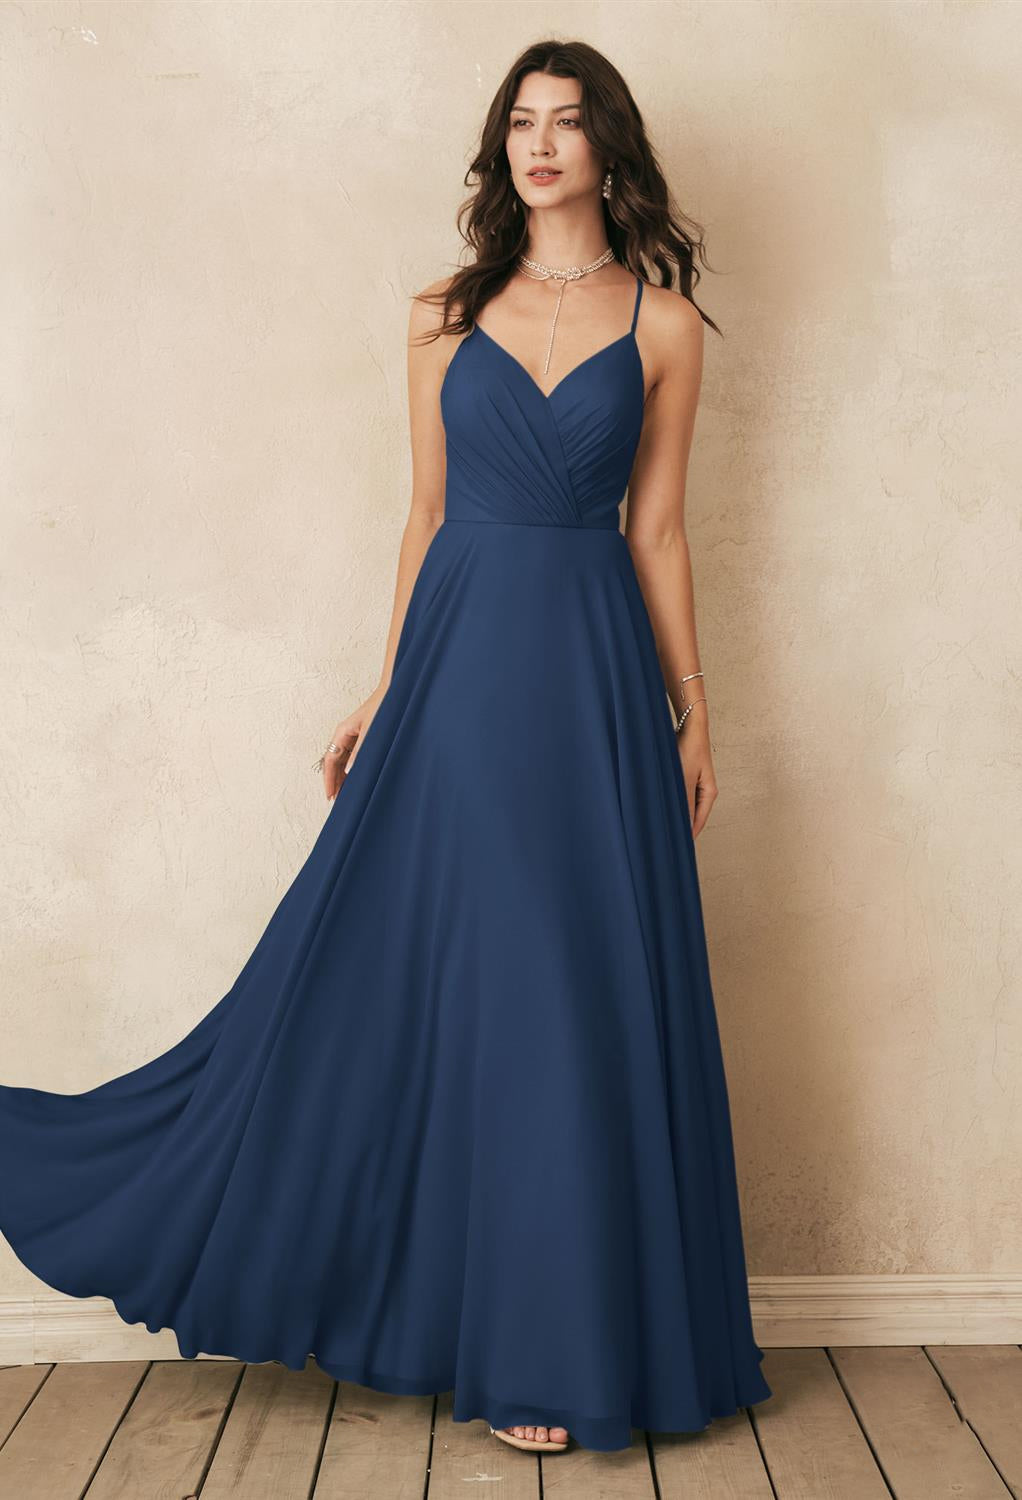 A Melody - Chiffon Bridesmaid Dress - Off the Rack in navy blue can be found at Bergamot Bridal, a bridal shop in London.